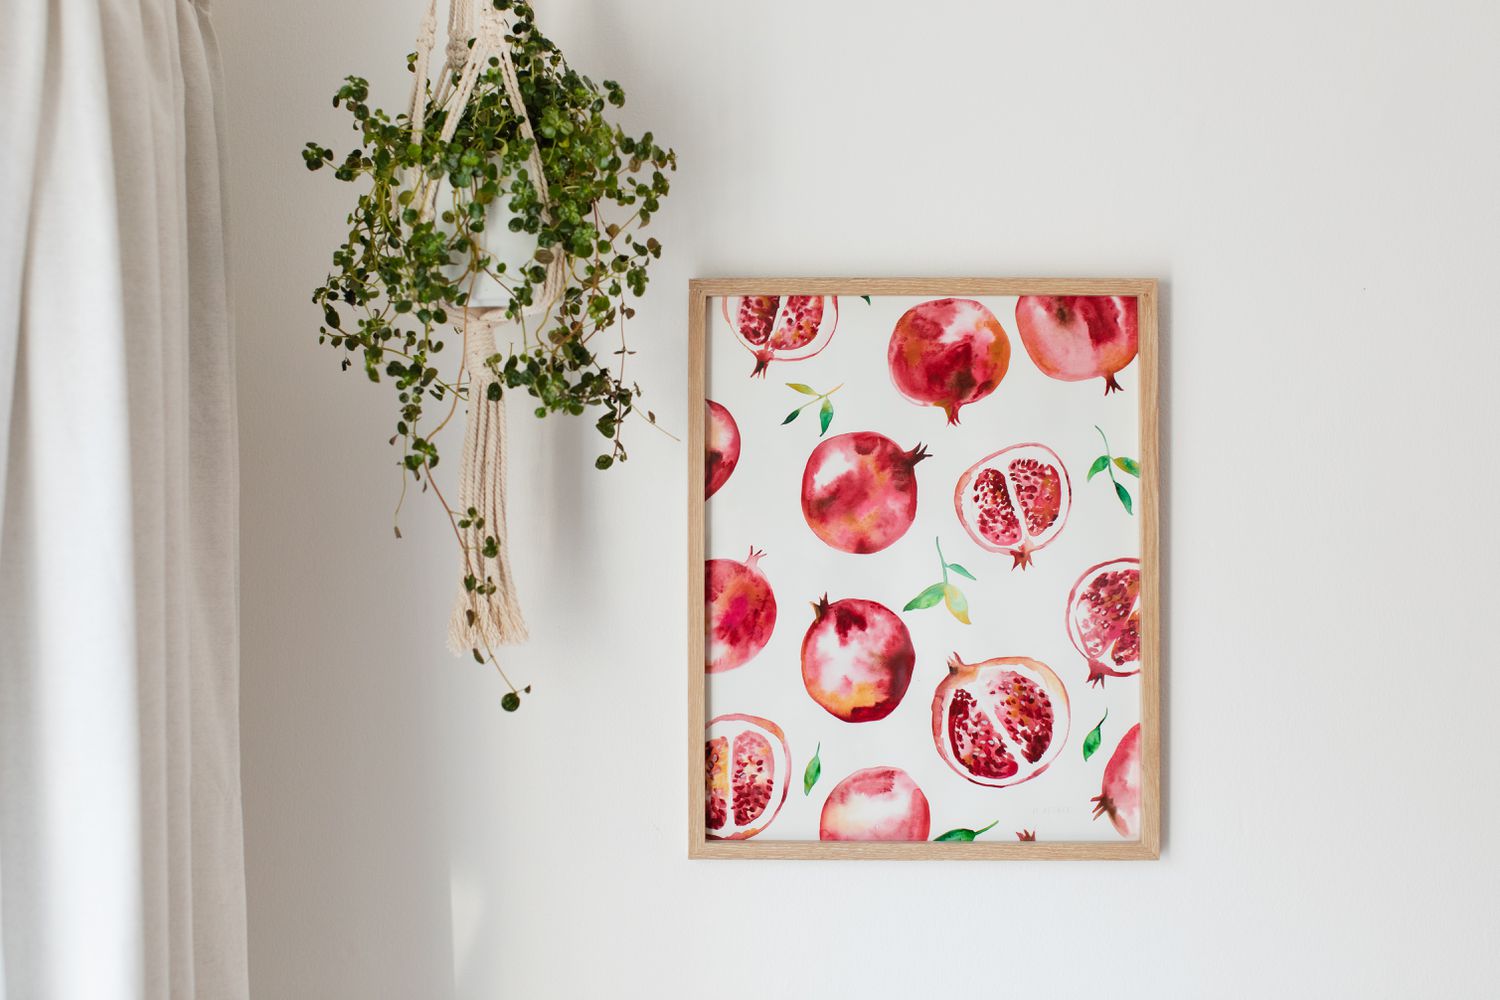 Framed art print of pomegranates on wall next to hanging houseplant